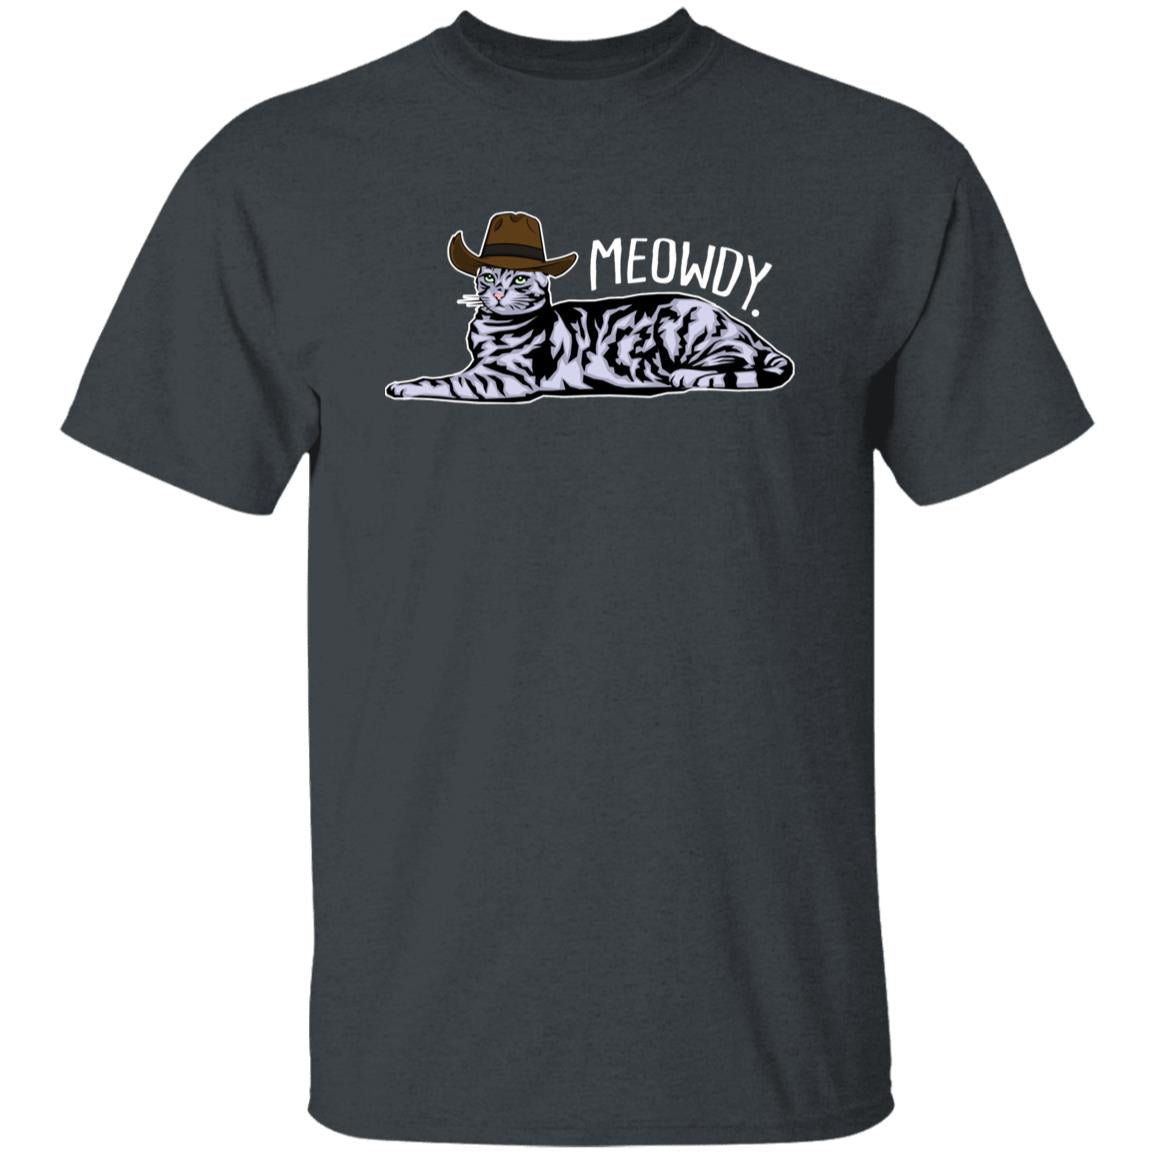 Meowdy T-Shirt gift Texas Cat with hat Cat mom Unisex Tee Black Navy Dark Heather-Family-Gift-Planet